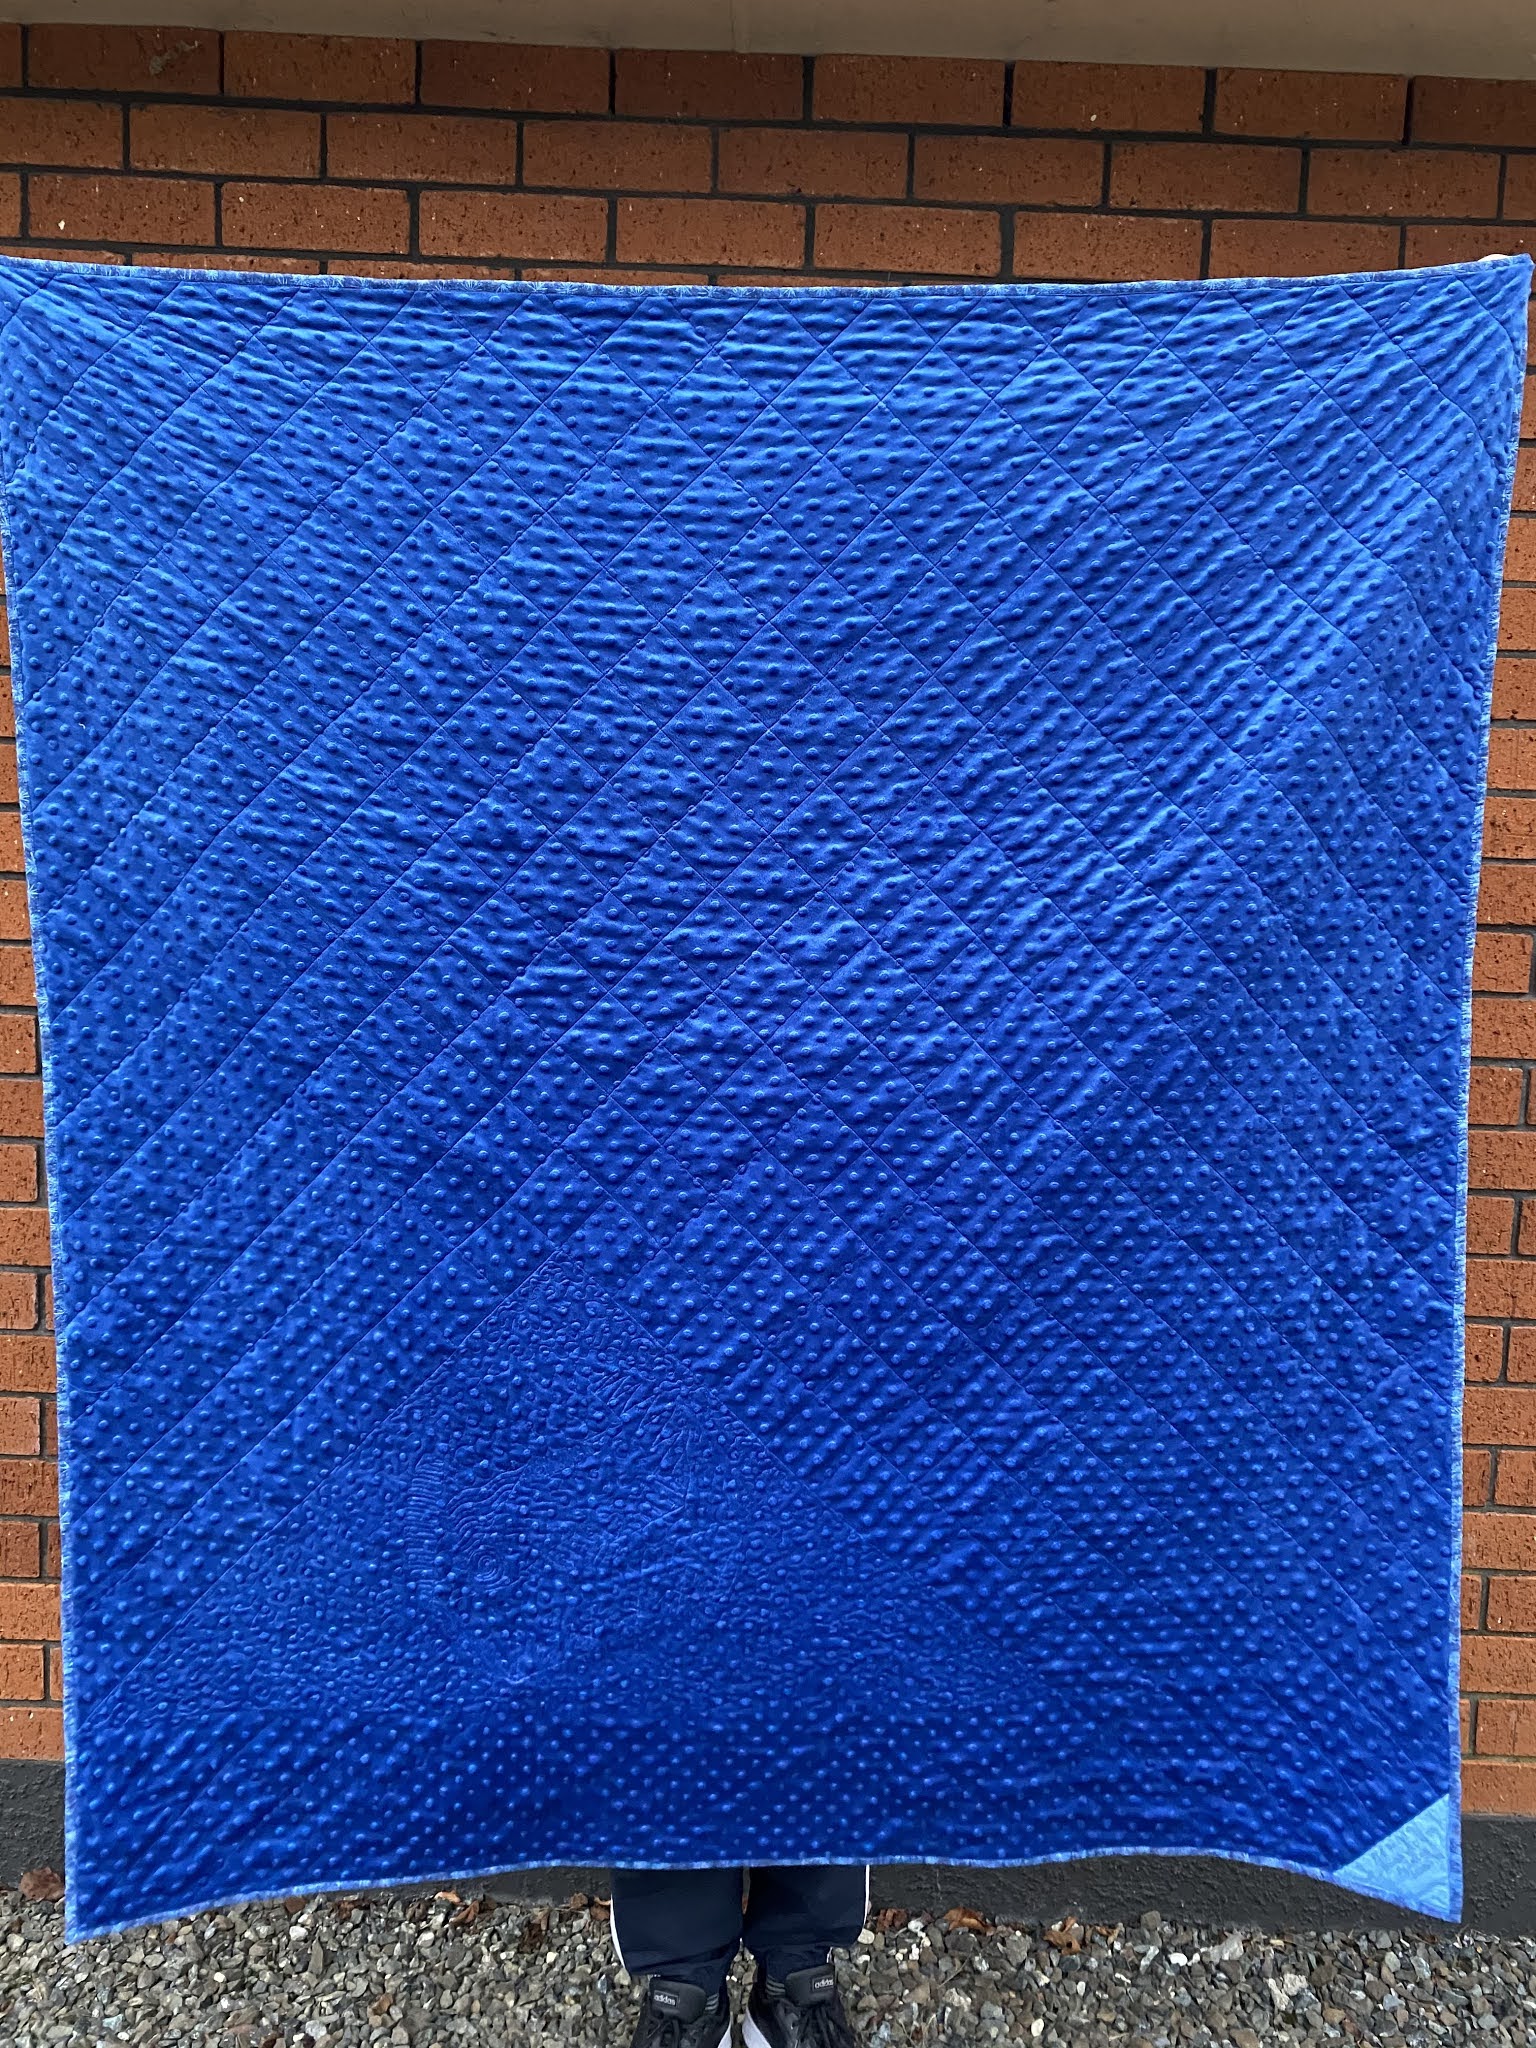 Handmade With Heart: Into the Light - lap quilt